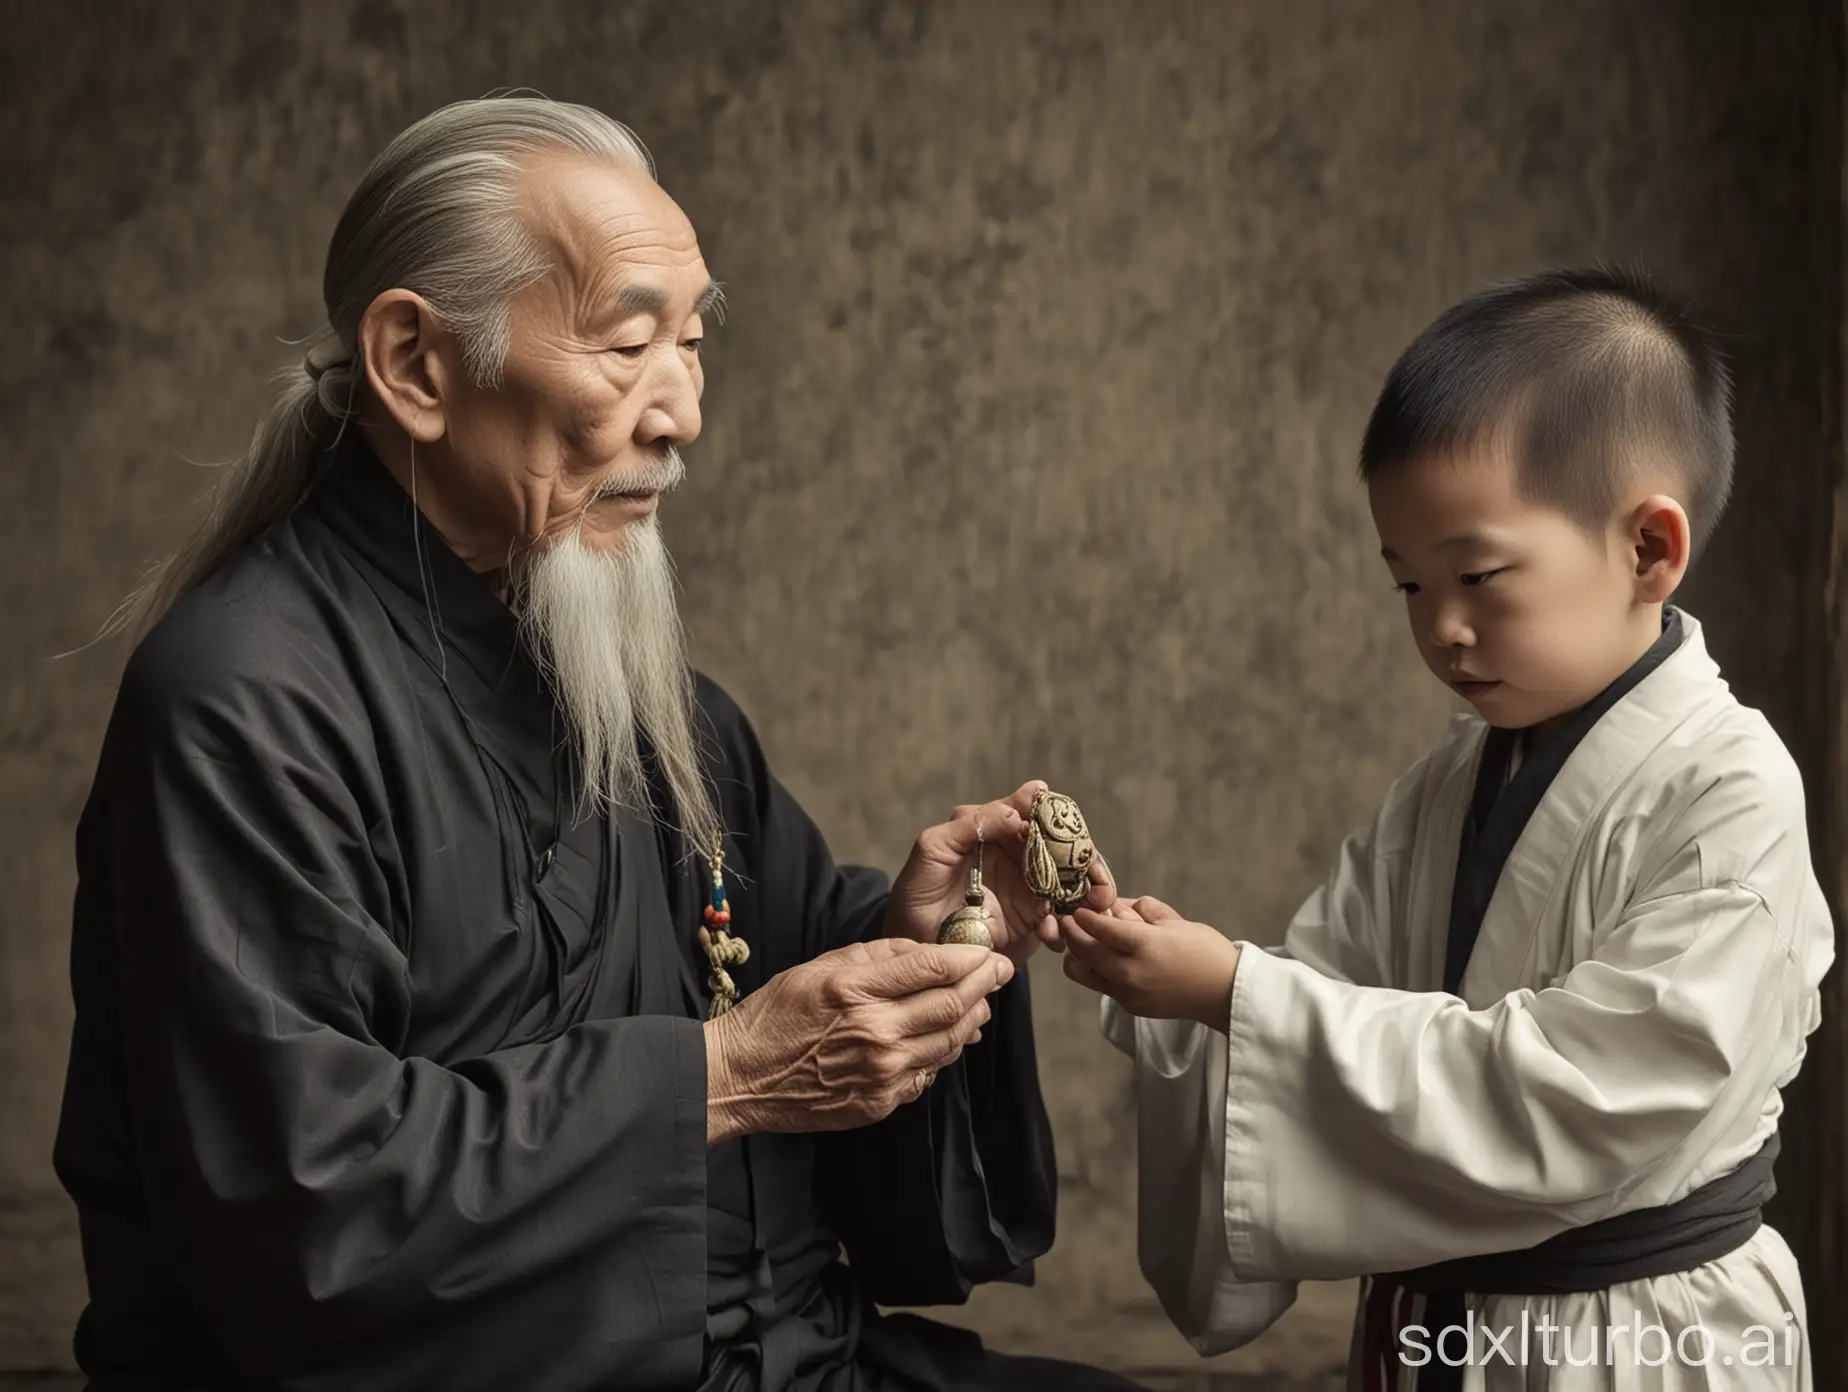 1 old Taoist priest, 1 young prentice little boy, old Taoist holding amulet, old Taoist seriously looking at the young prentice